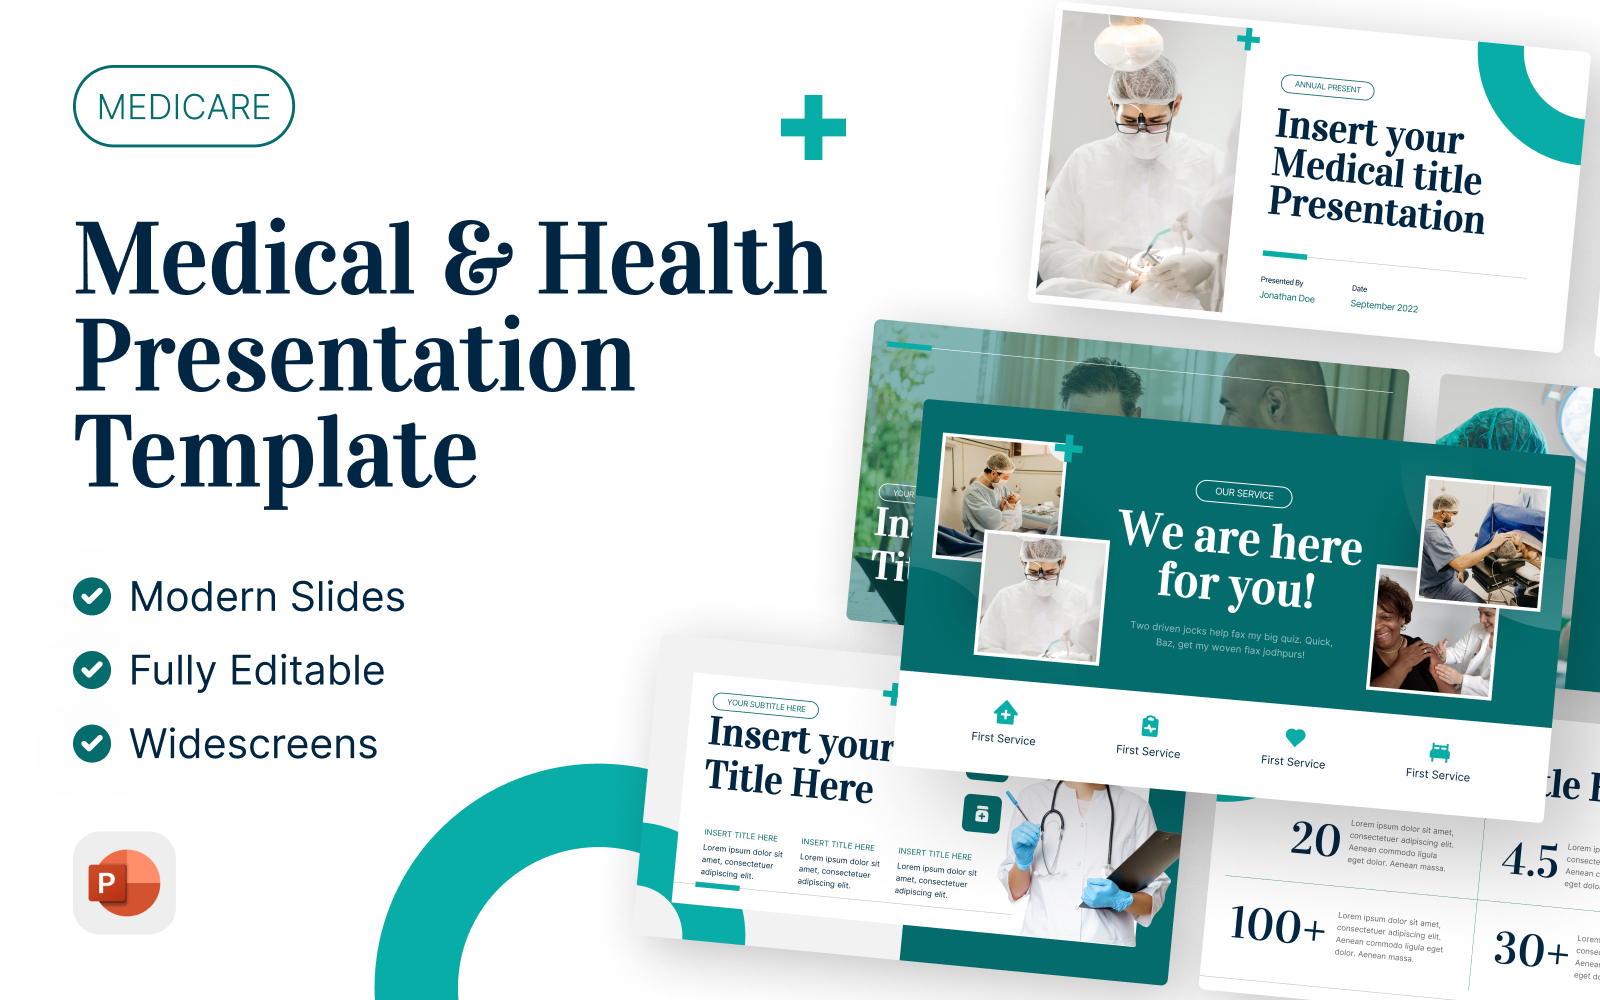 Medicare - Medical and Health PowerPoint Presentation Template